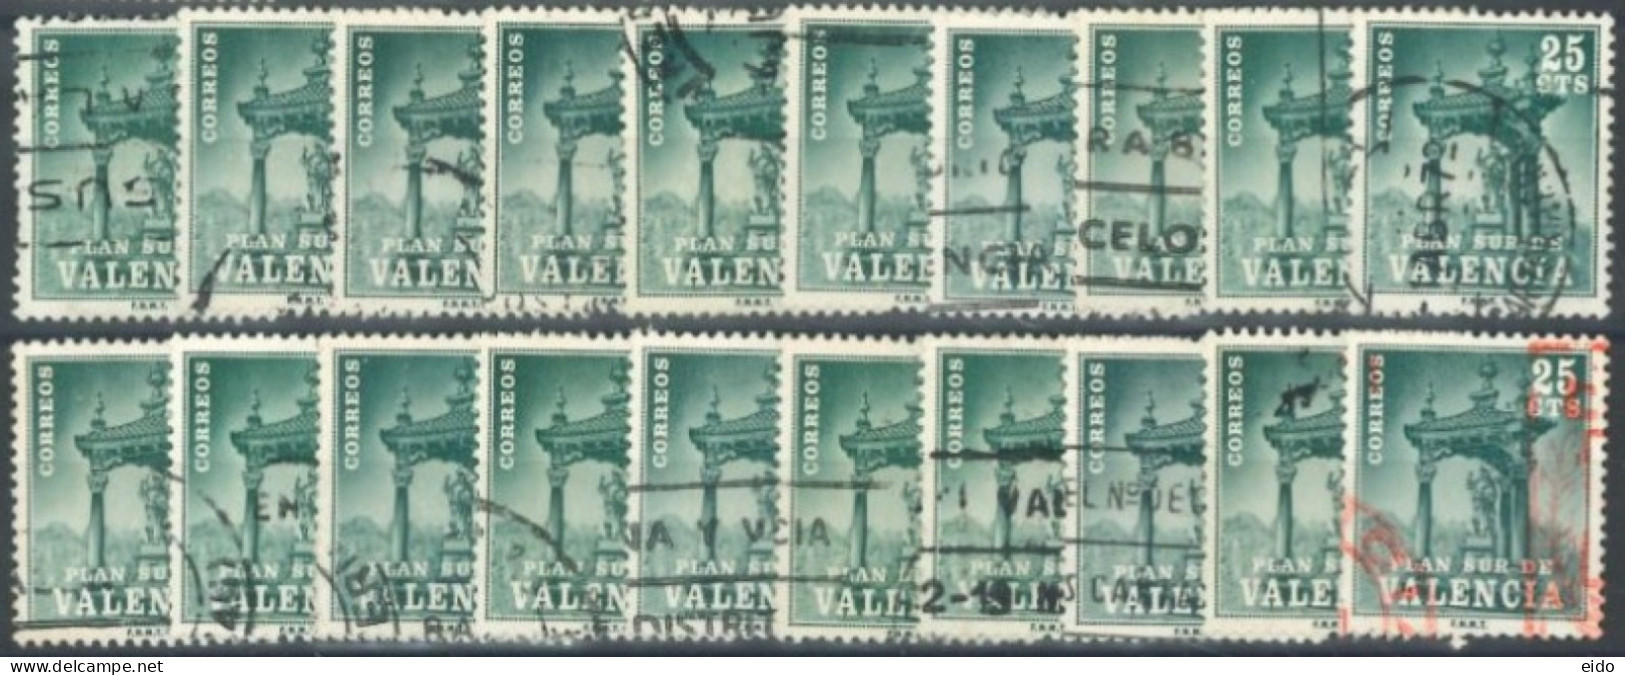 SPAIN, VALENCIA STAMP QTY. 20 DISCOUNTED (SPECIAL PRICE), USED. - Oblitérés